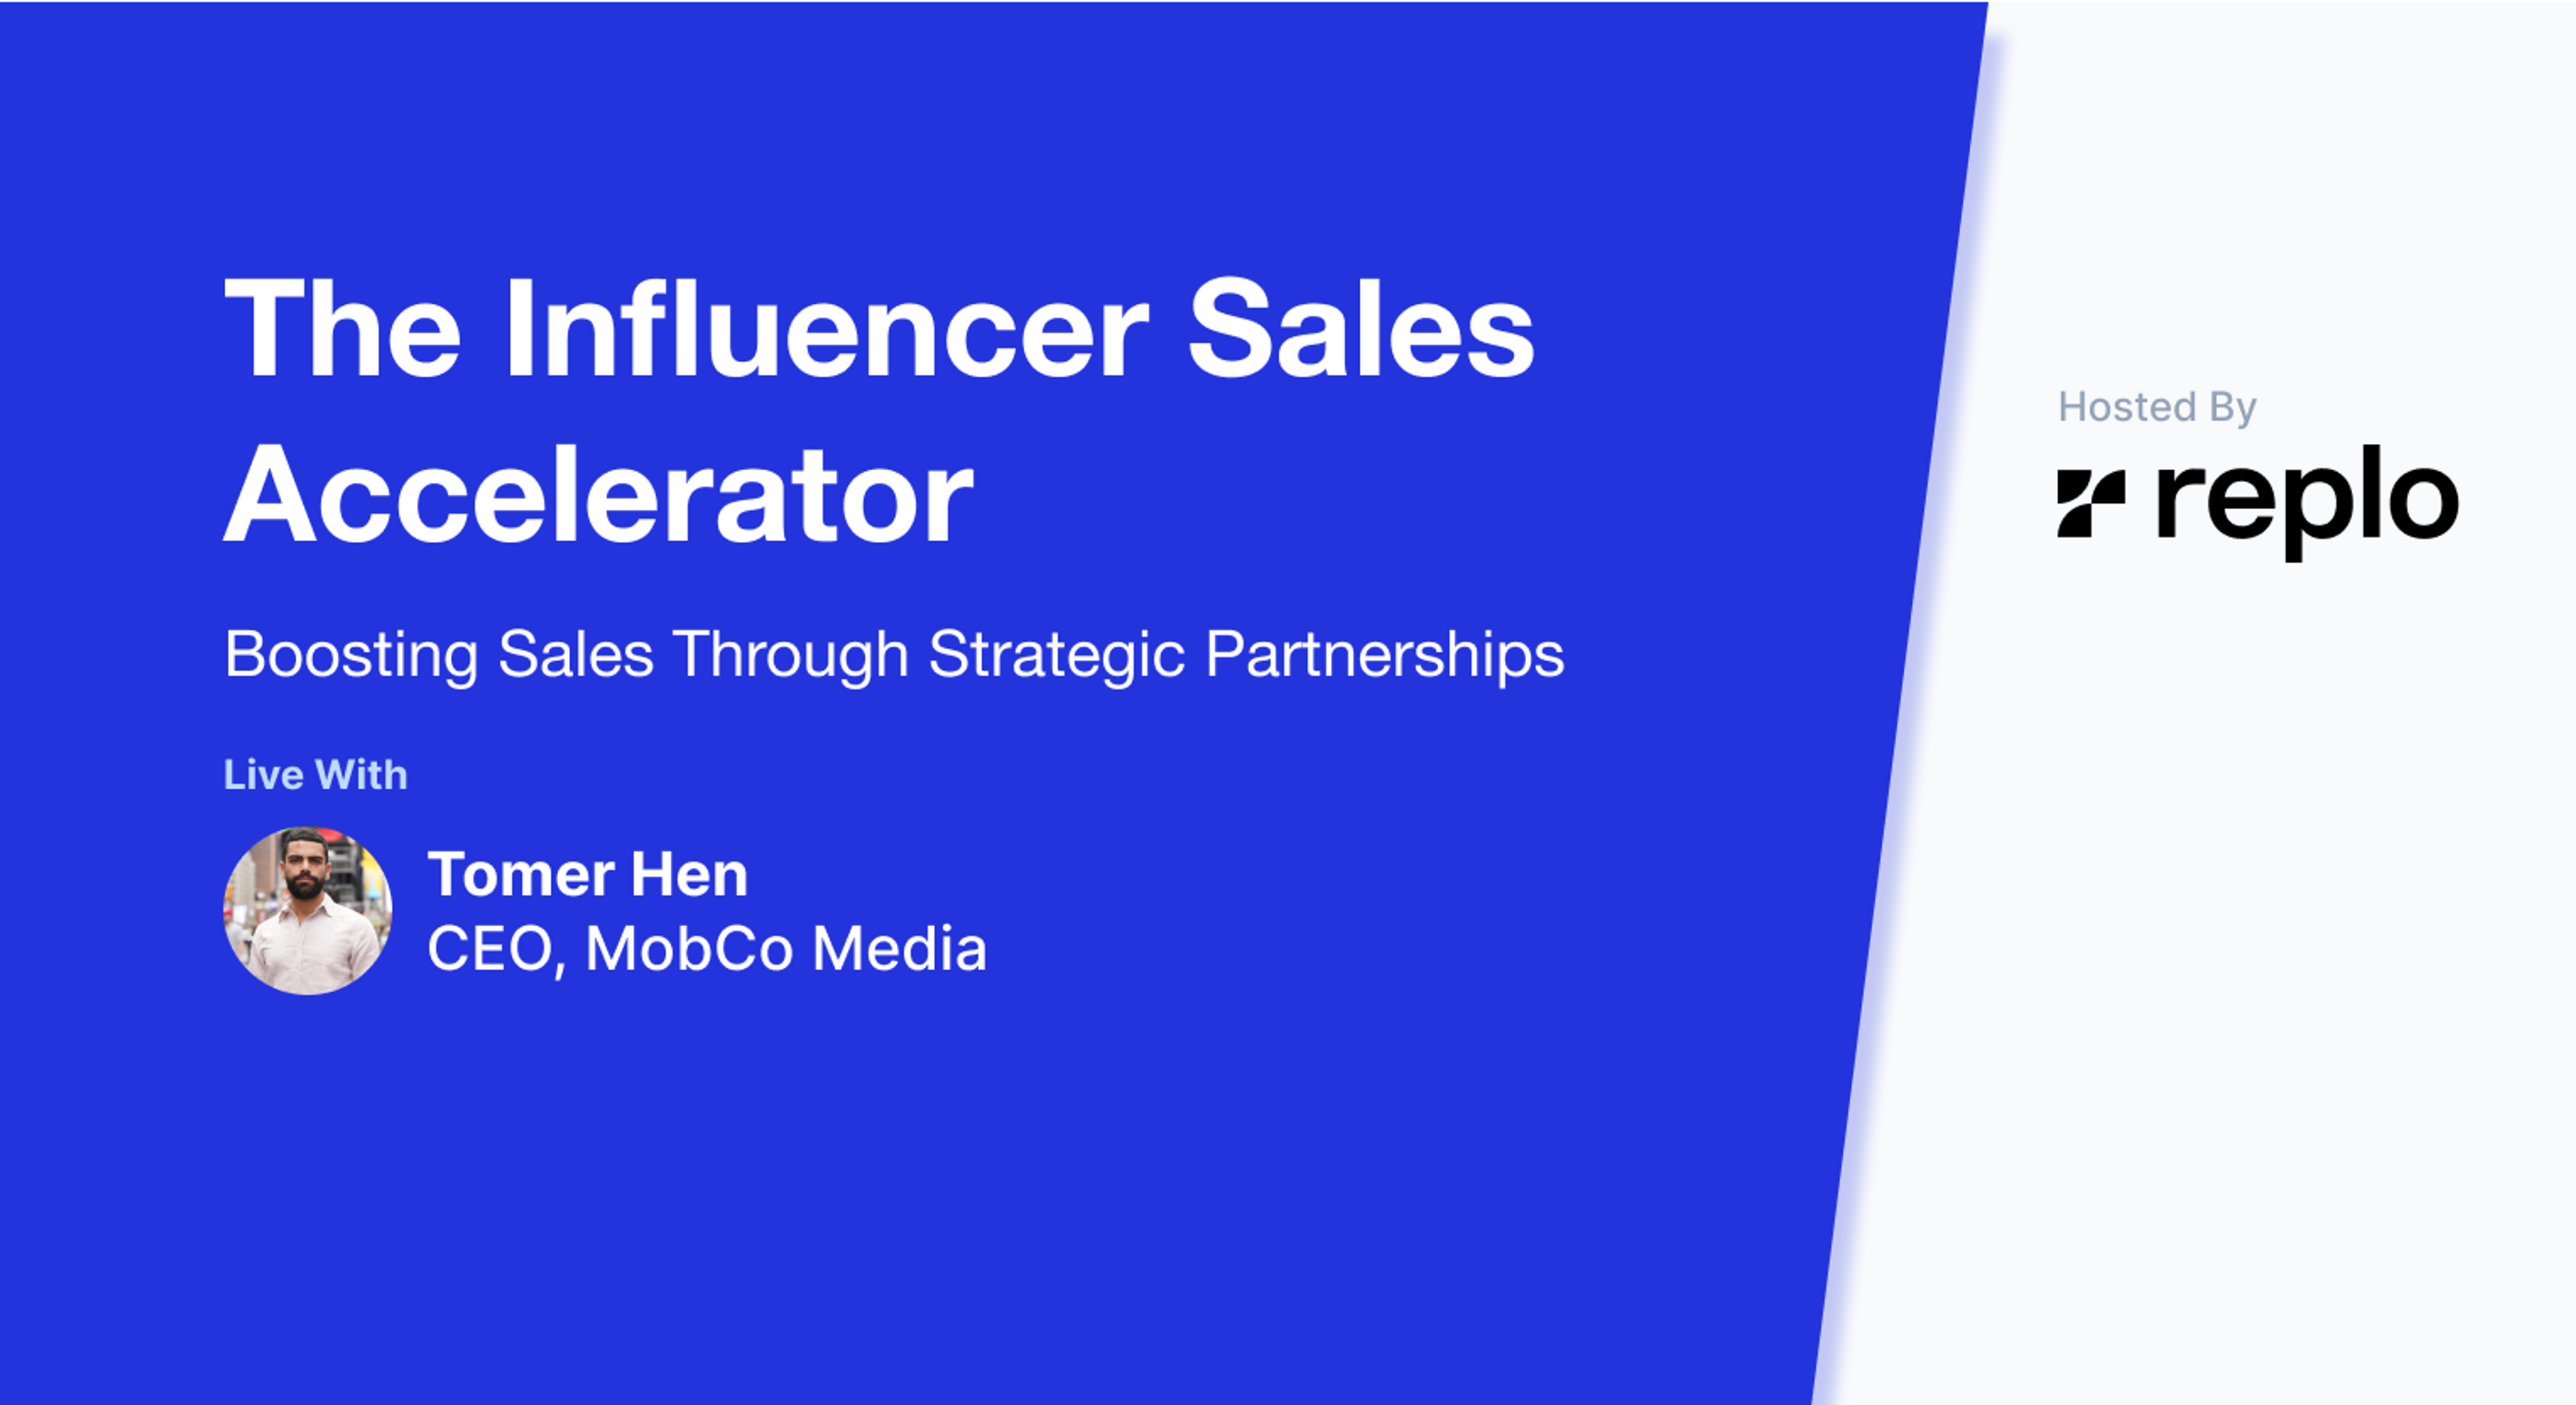 The Influencer Sales Accelerator